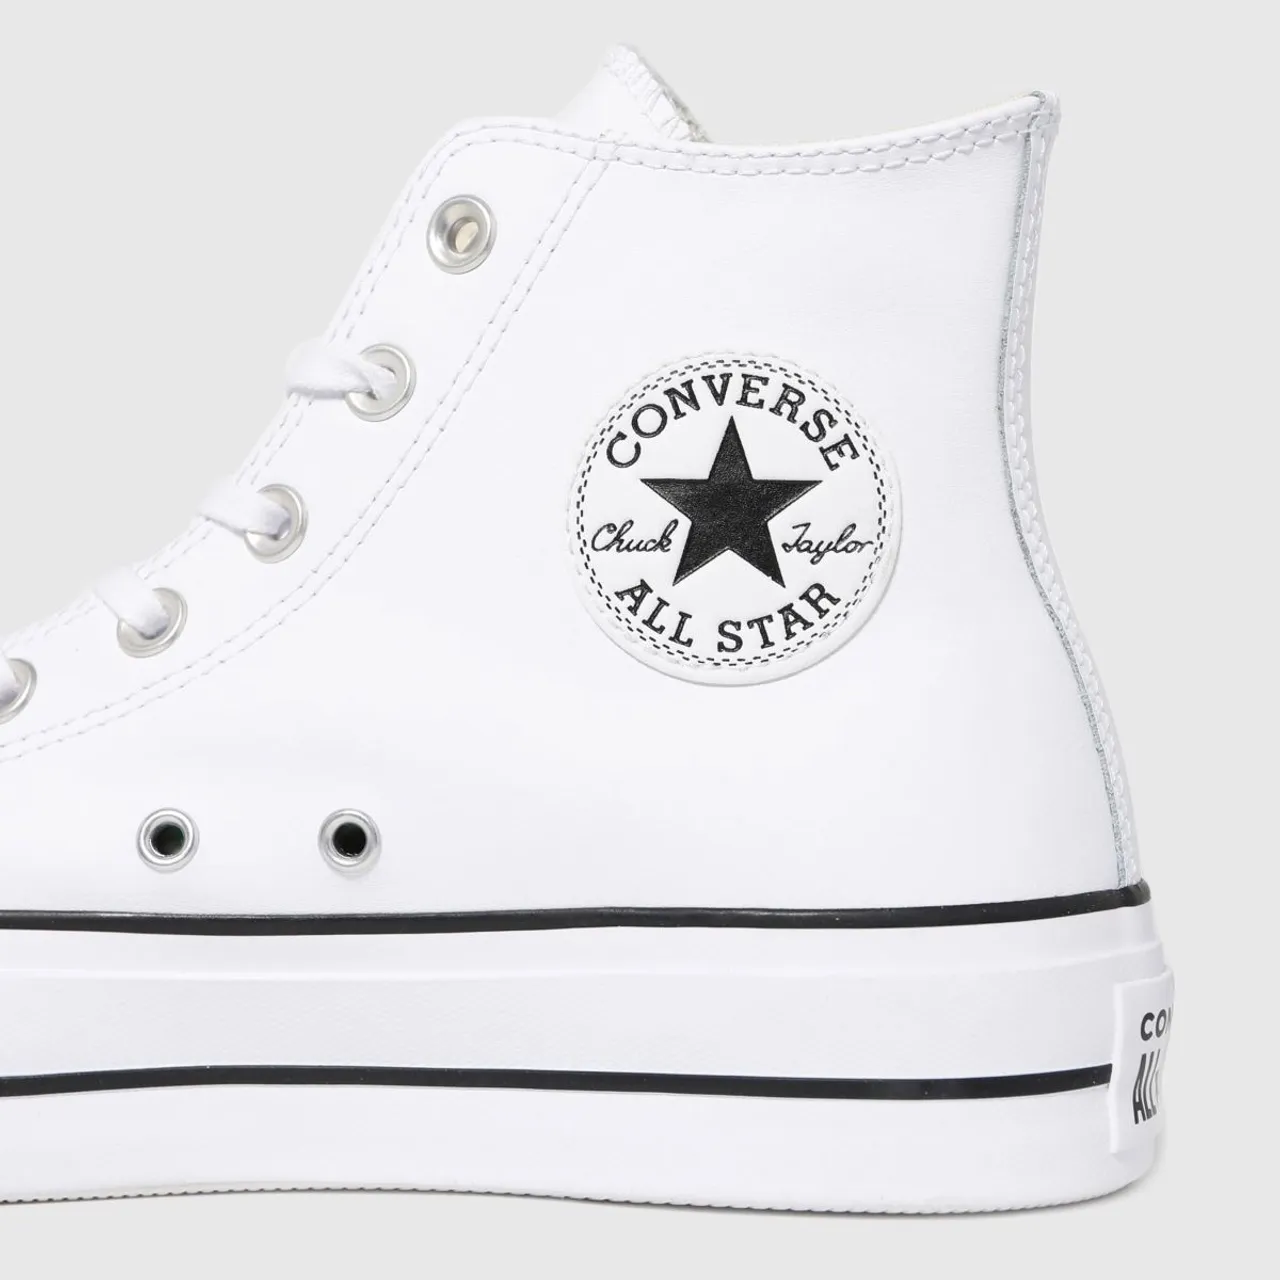 Converse Lift Hi Leather Trainers In White